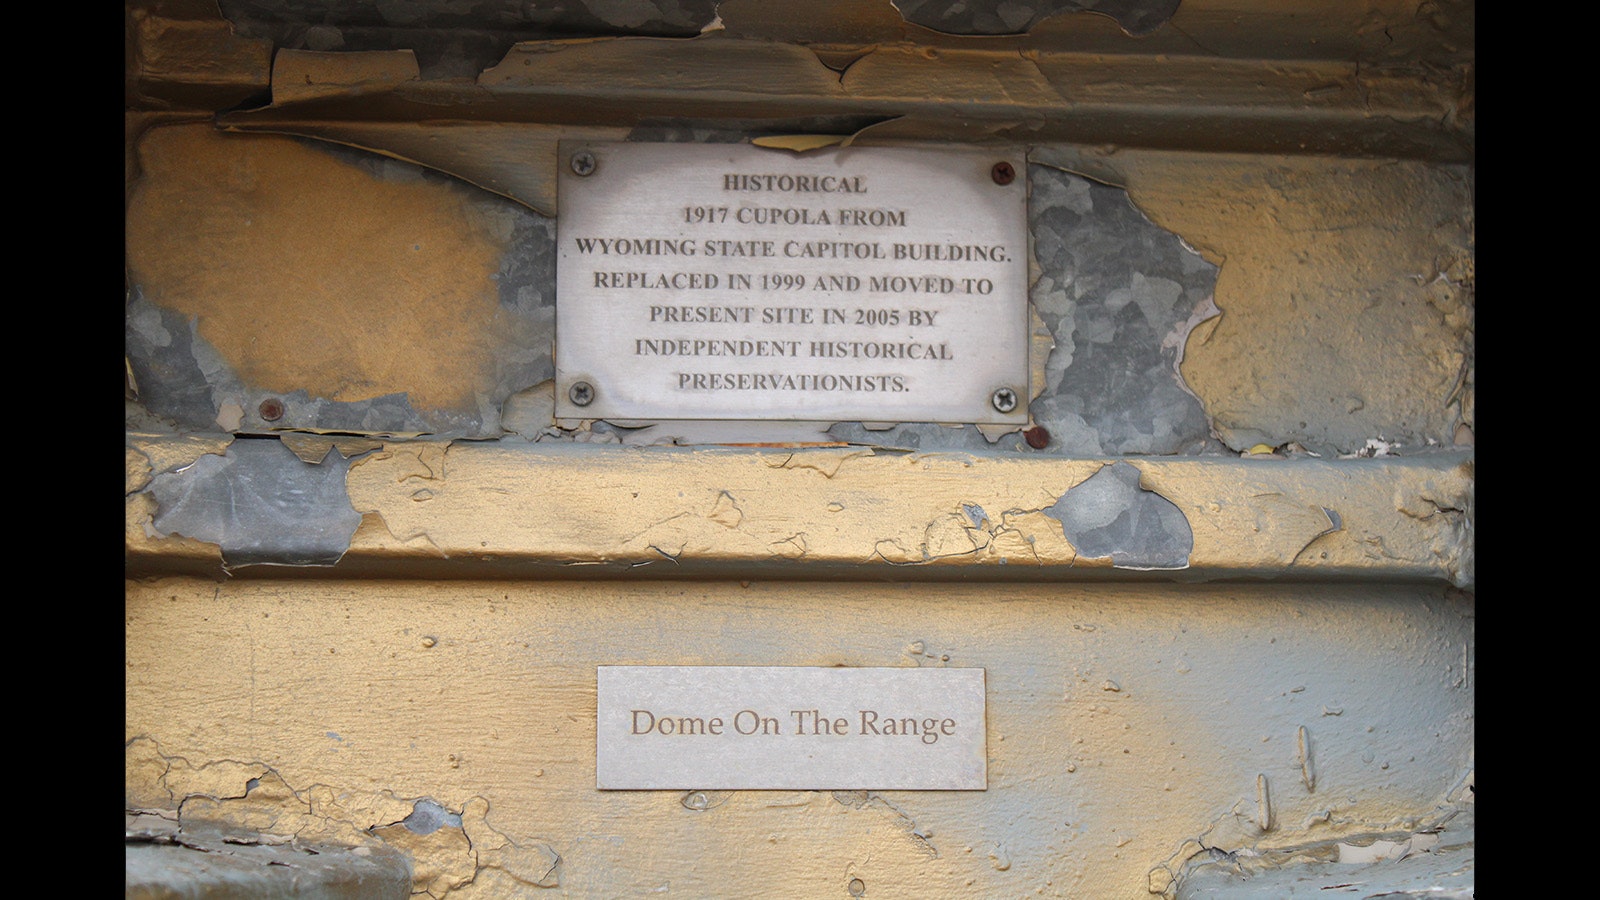 After putting an old Wyoming Capitol dome on a rural property west of Cheyenne, someone put a plaque on it, dubbing it the "Dome on the Range."